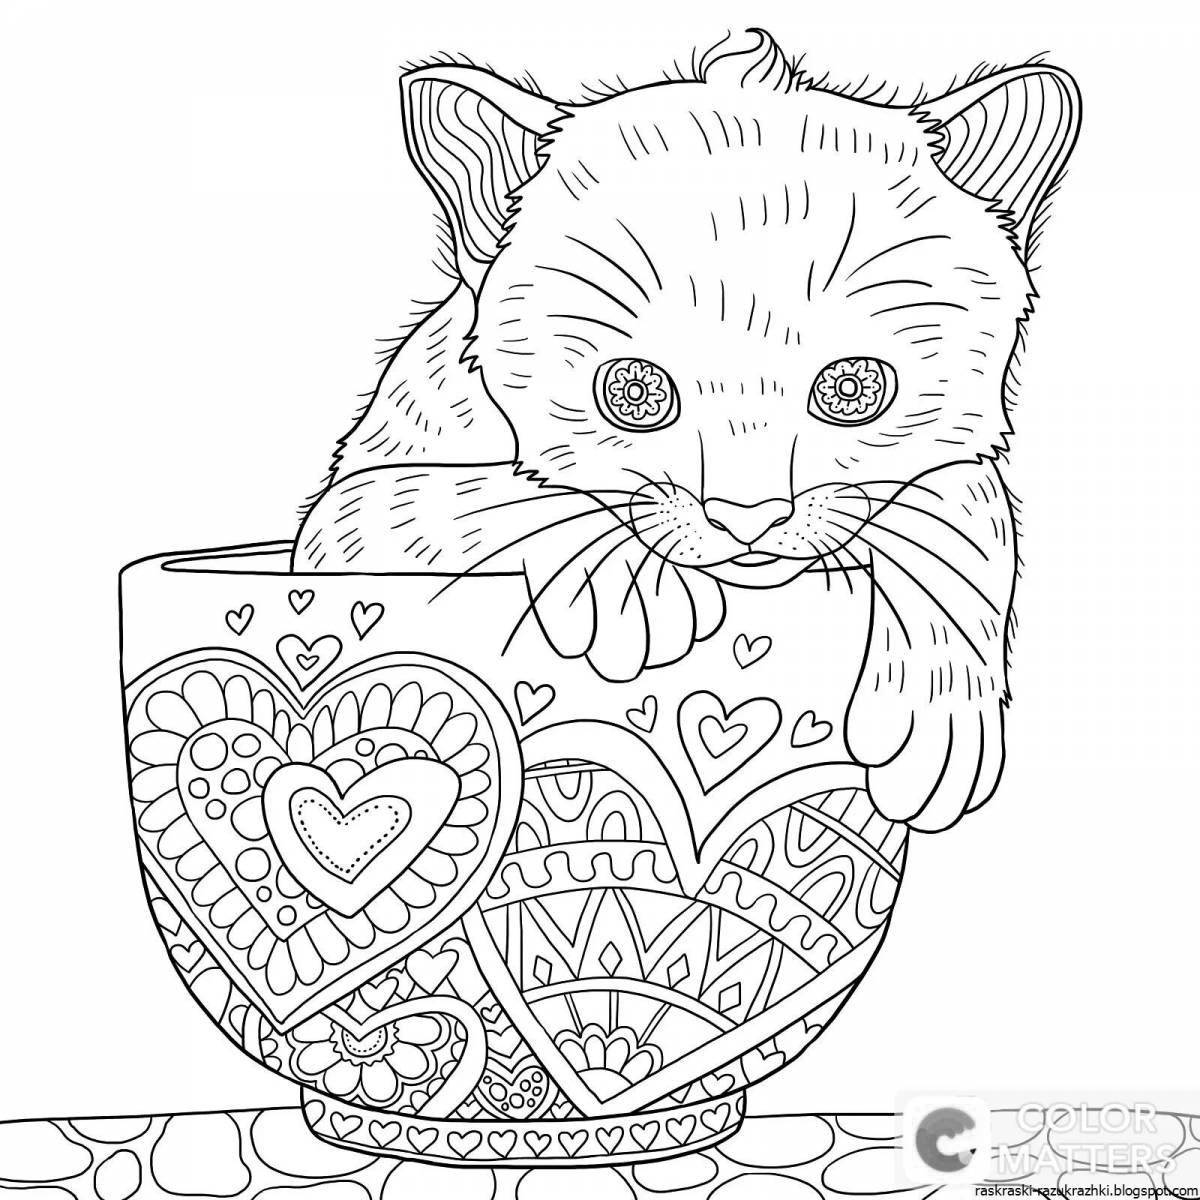 A fascinating coloring book for girls 10 years old - very beautiful animals